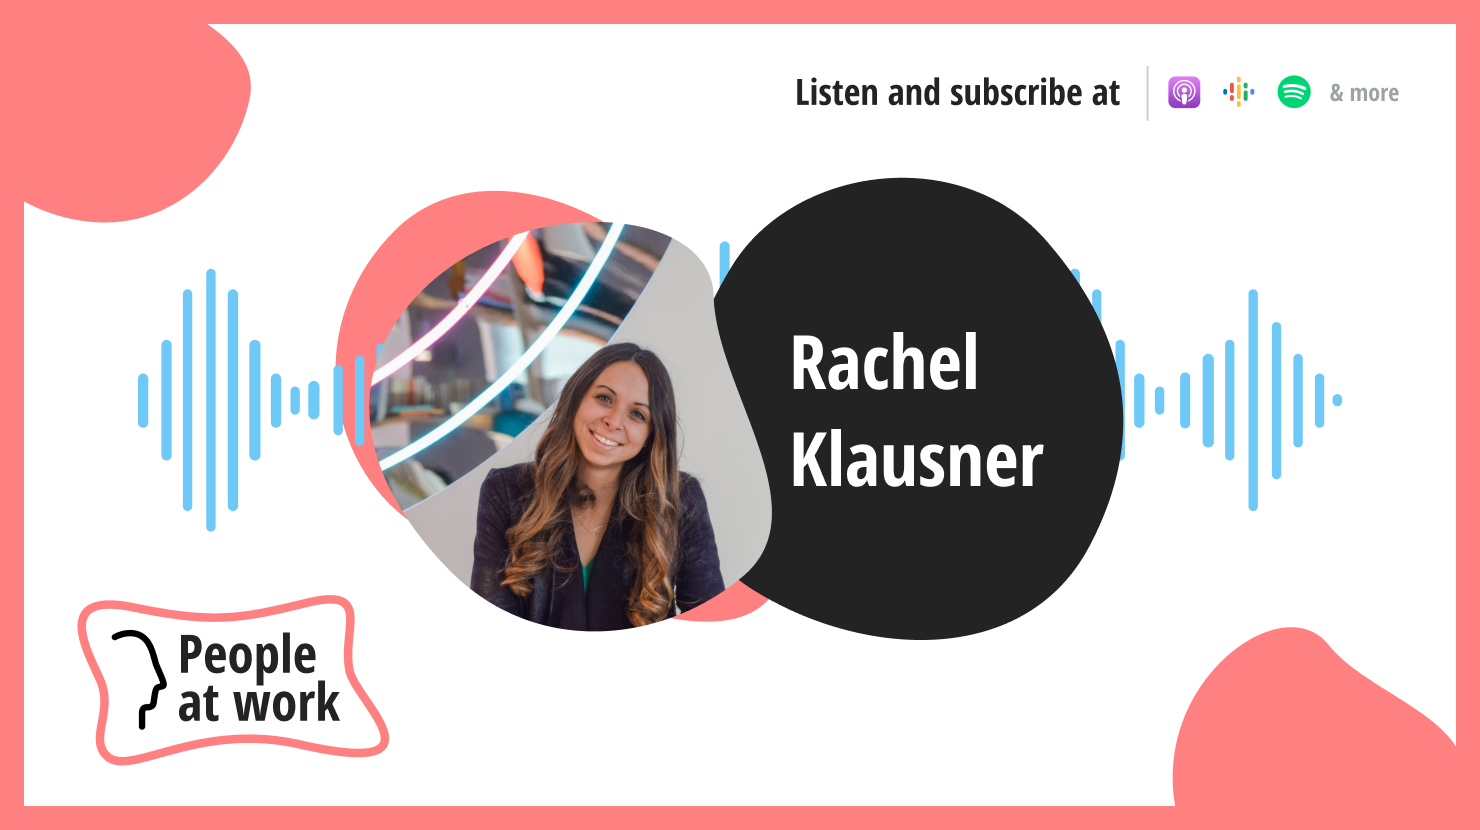 Social impact at work for greater good with Rachel Klausner